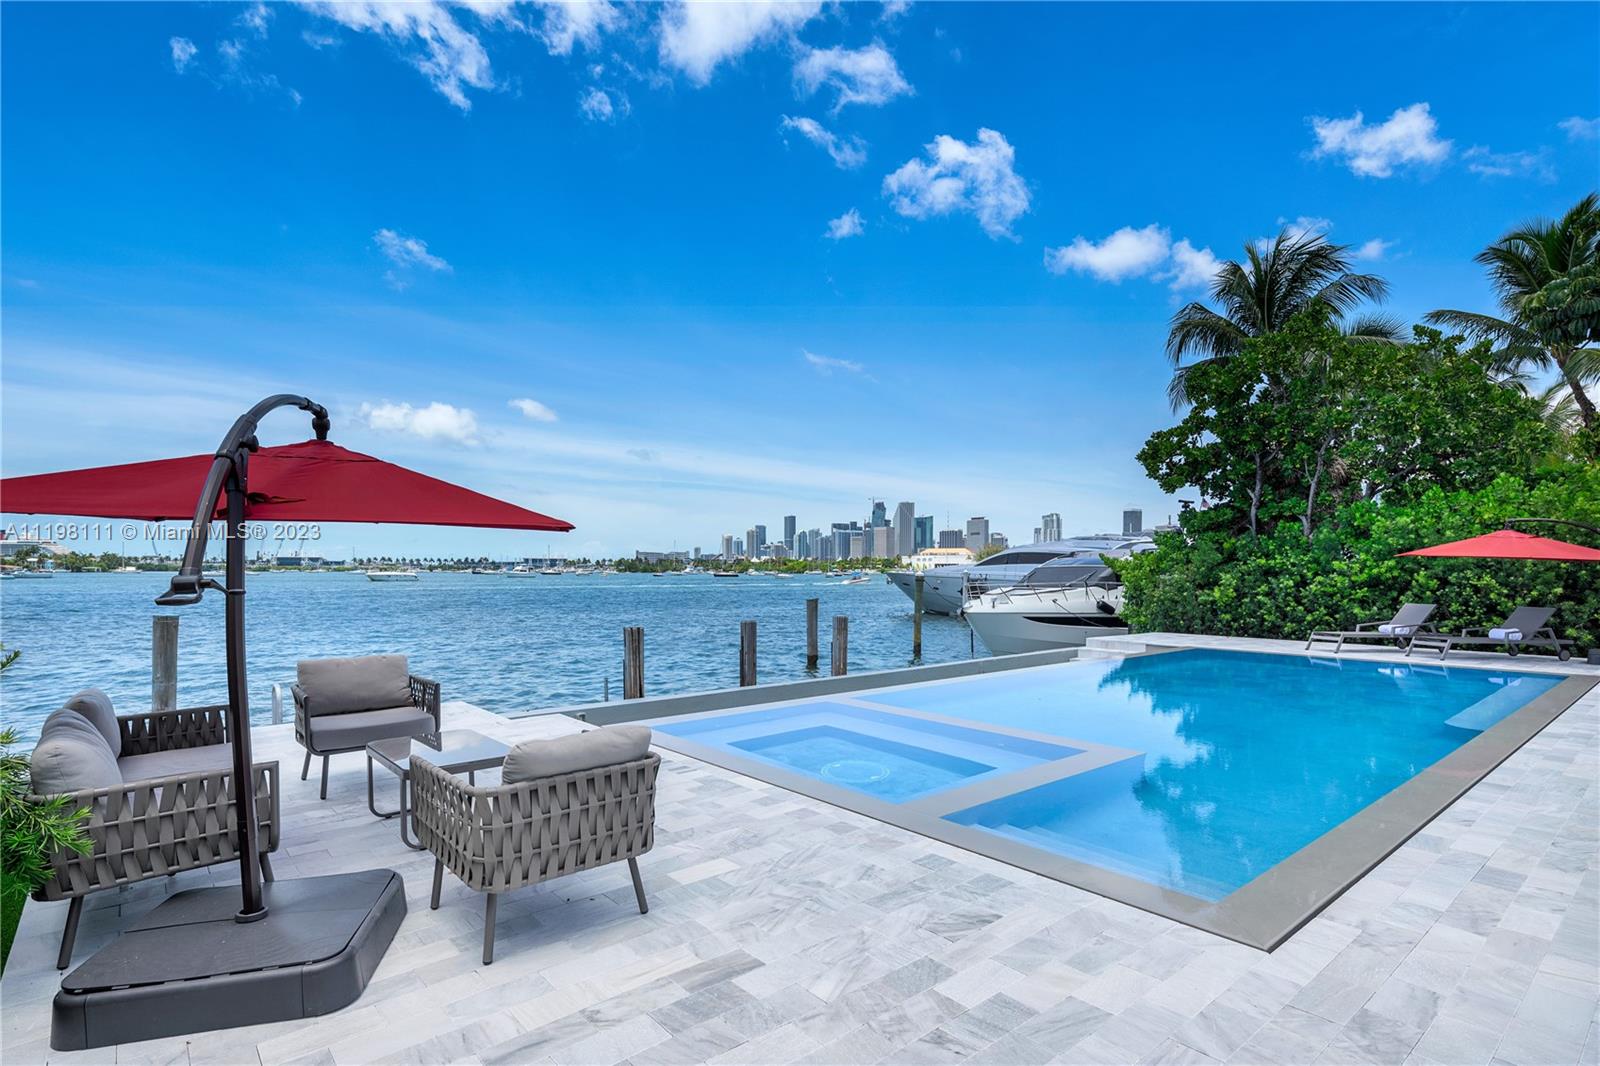 Step Inside With Me! Live the ultimate Miami lifestyle with stunning unobstructed water and Skyline views on the Venetian Islands. This Southern facing beauty is a boater's dream with 70 FT of water frontage and direct Bay access. Situated on an expansive 12,250 SF lot and recently renovated, this home features 6 bedrooms with tile and oak plank wood flooring throughout. The oversized eat-in kitchen is finished with Wolf appliances and marble countertops. The open living area is complete with a bar and sweeping bay views. Wake up and walk out onto the primary suite's oversized balcony to take in the gorgeous Miami weather. This home is made for entertaining with an outdoor summer kitchen, infinity pool, and plenty of outdoor lounging.